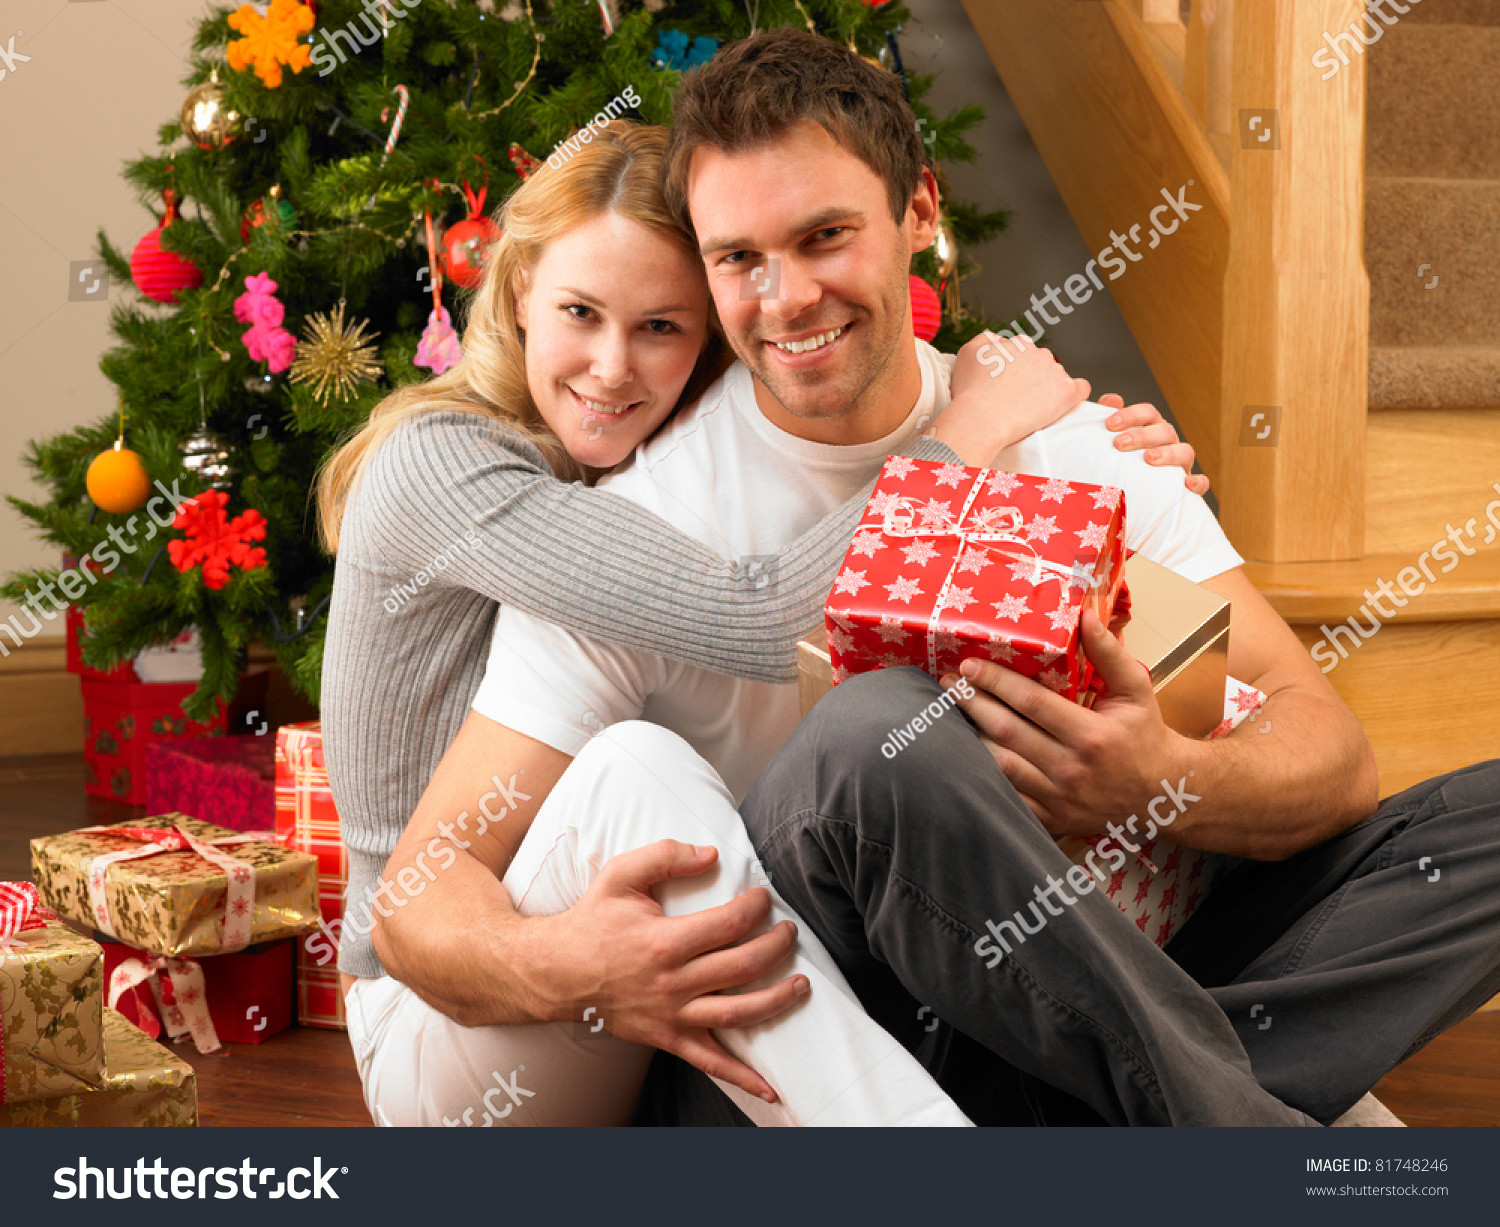 Christmas Gift Ideas Young Couple
 Young Couple With Gifts In Front Christmas Tree Stock